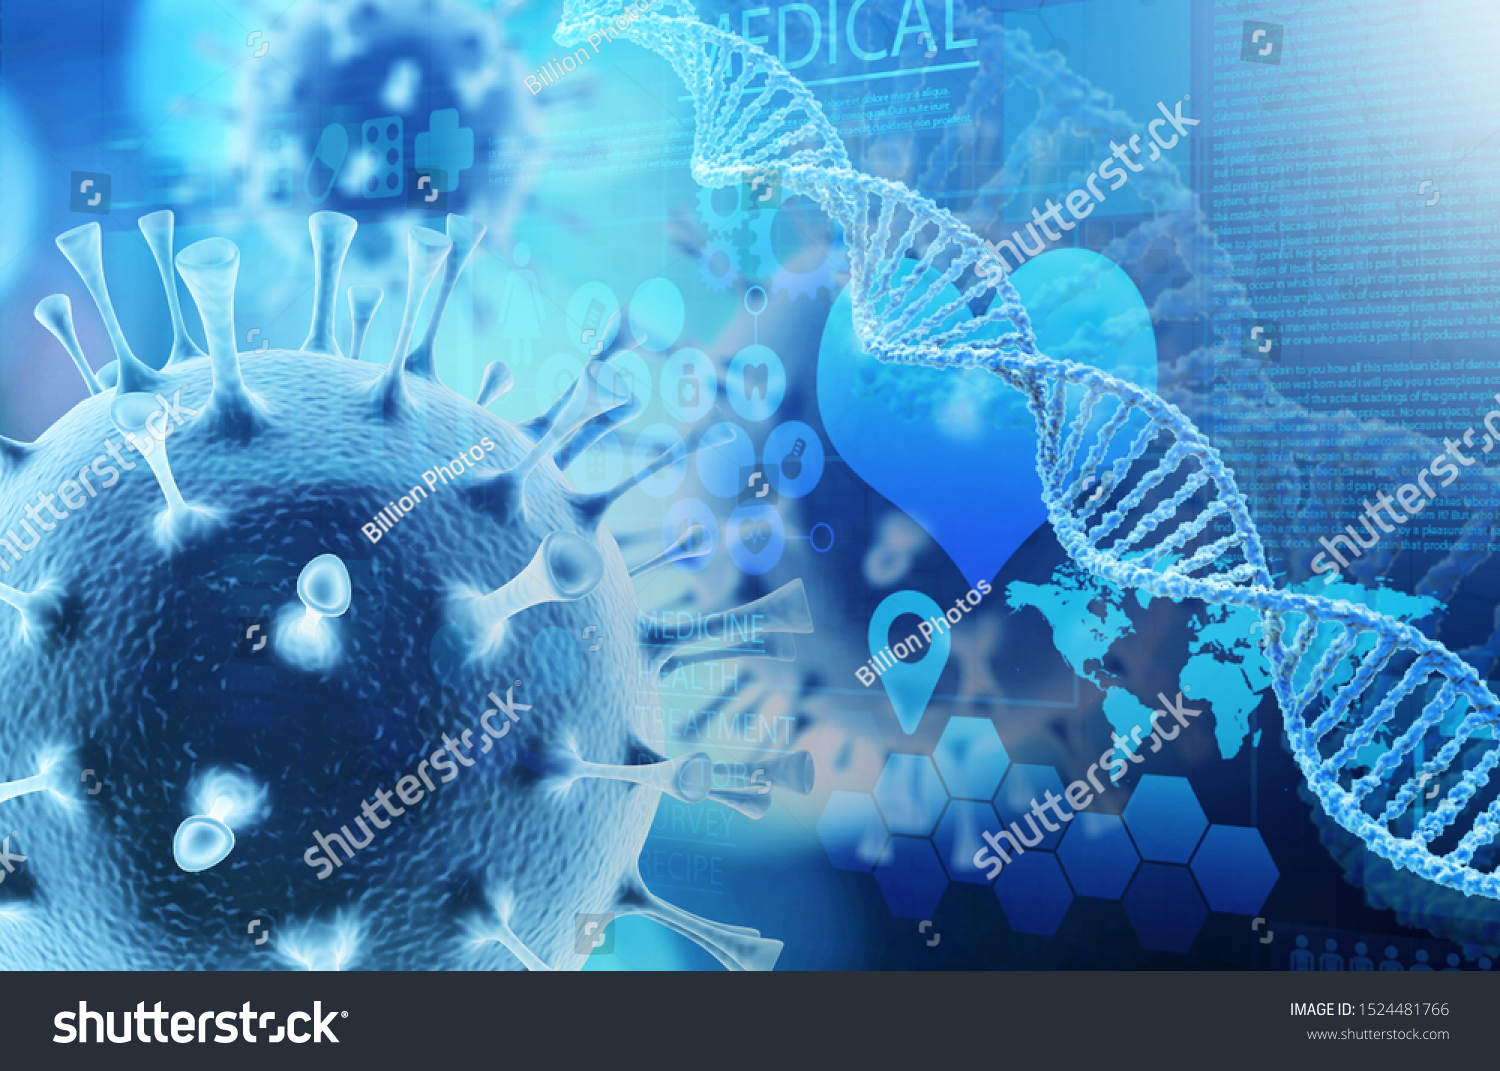 Close-up of virus cells or bacteria on light background #1524481766